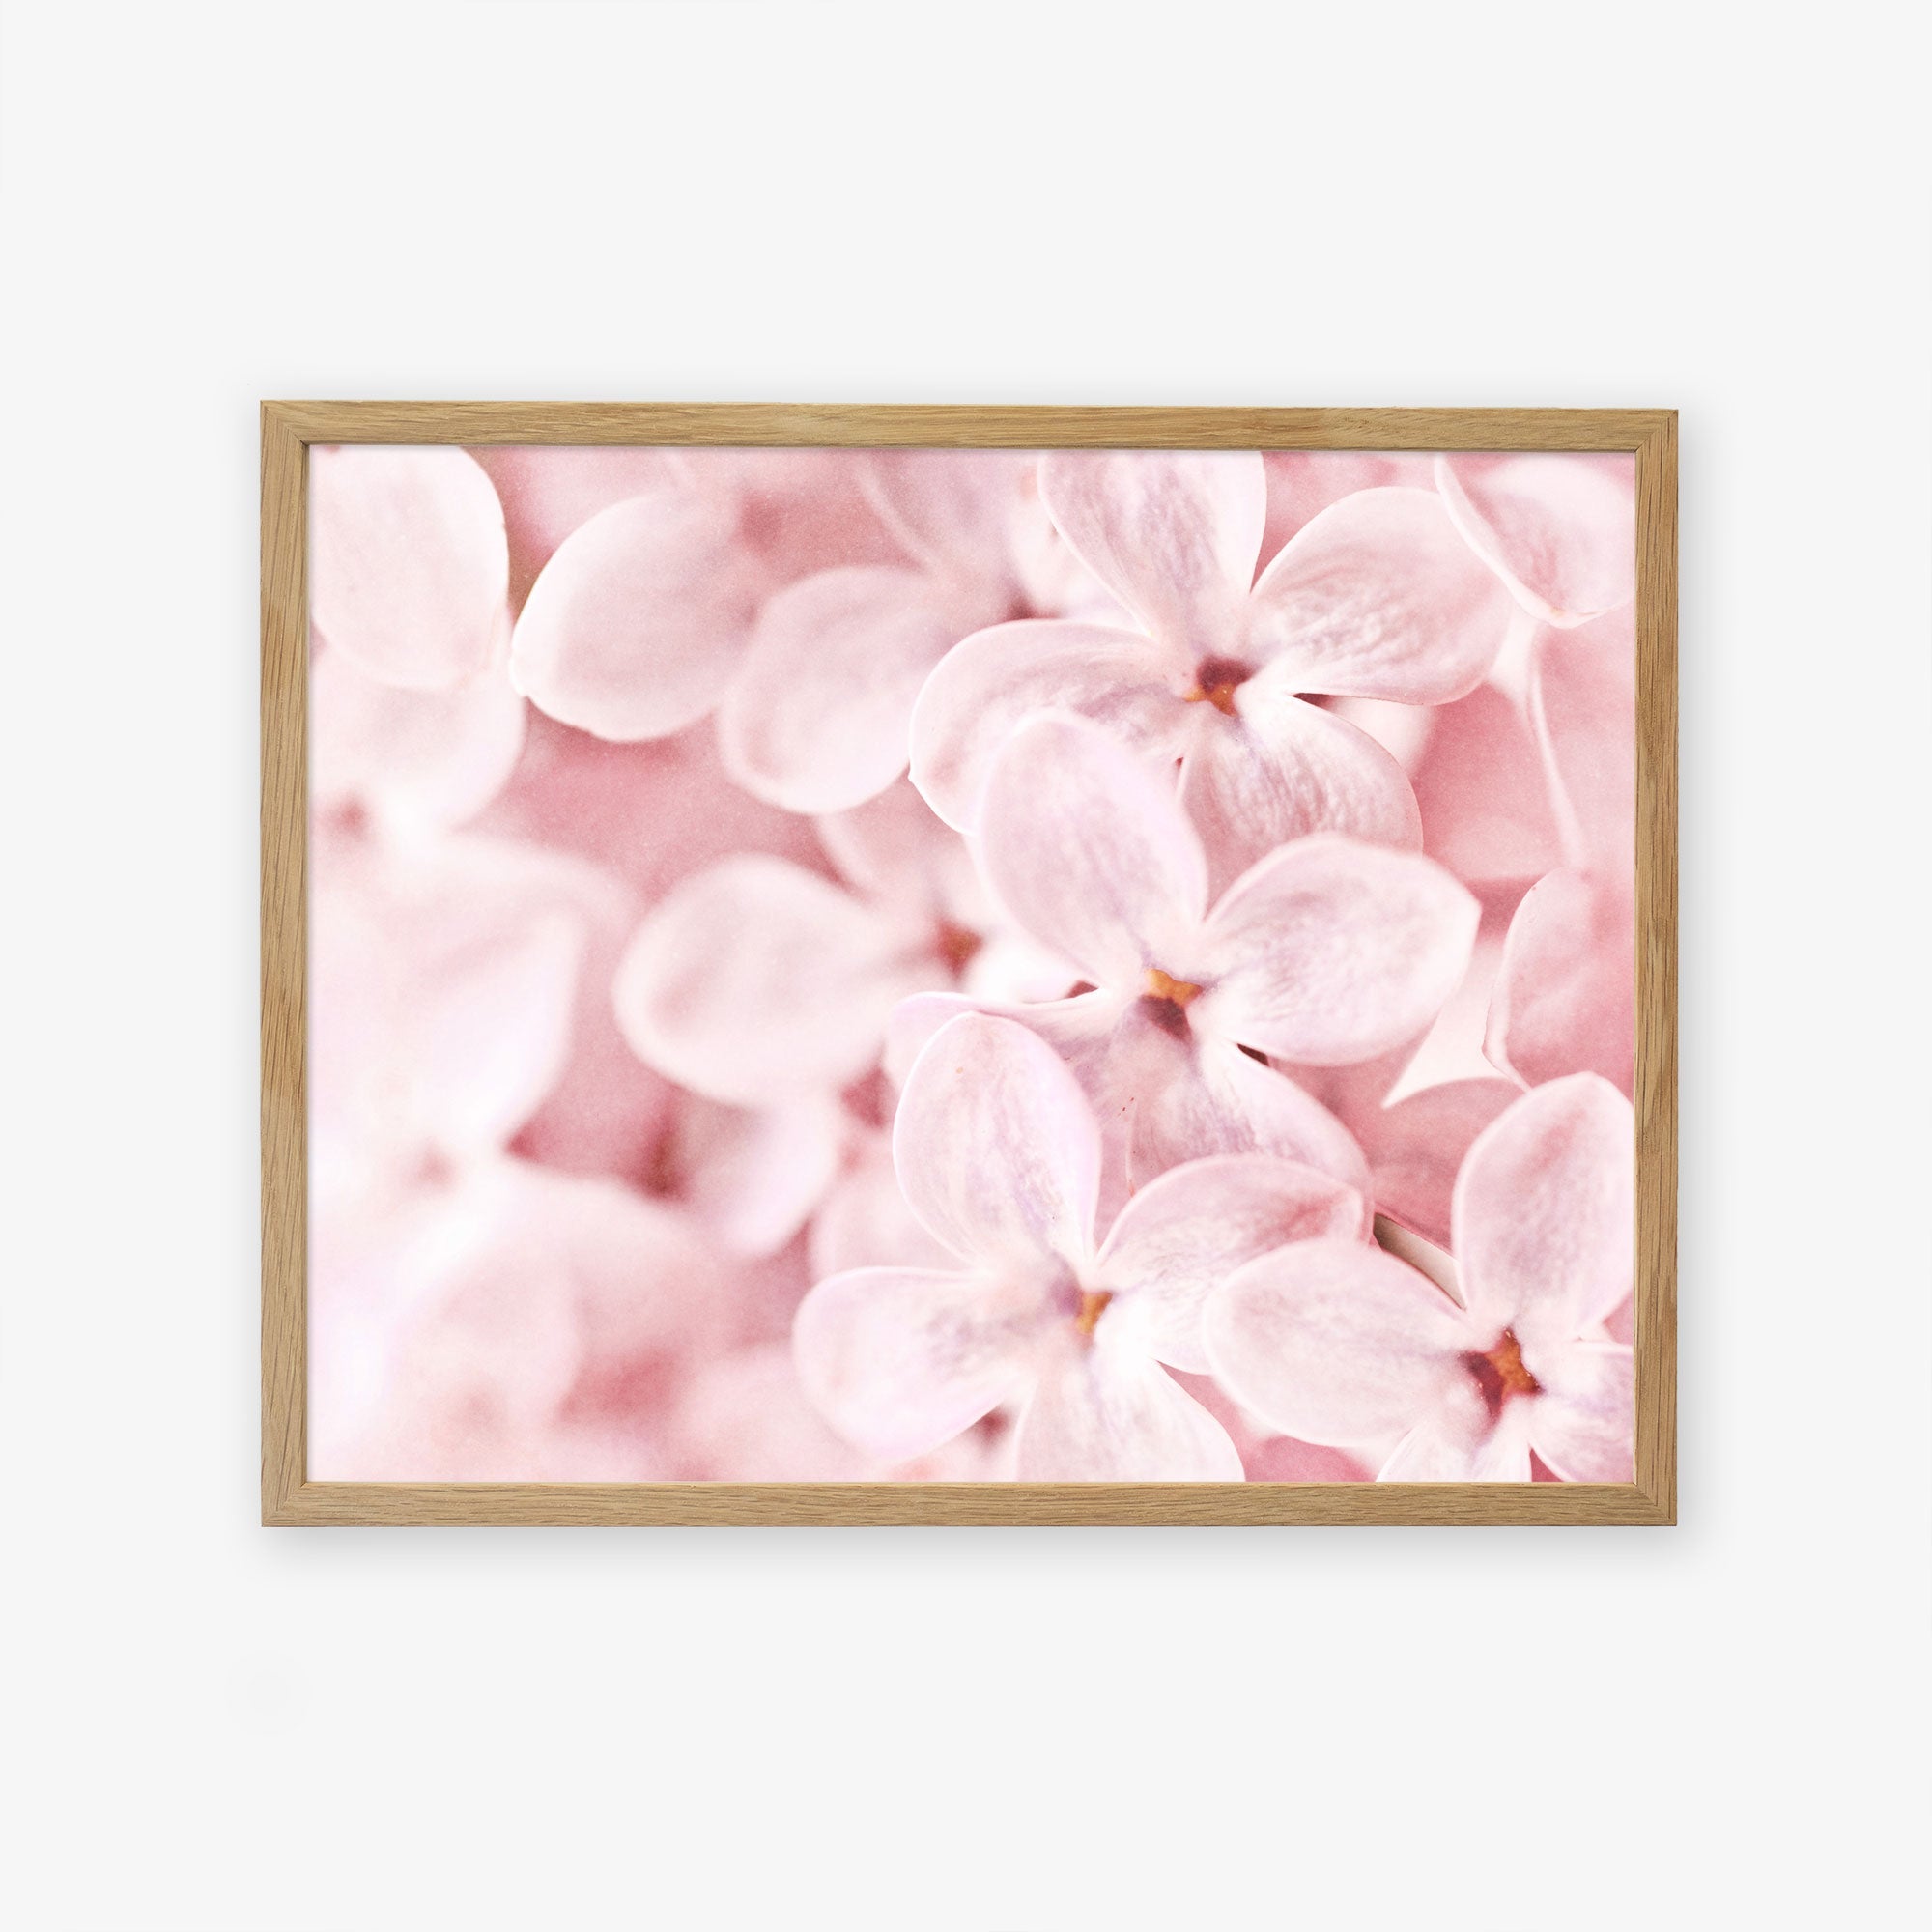 A framed photograph of the Pink Botanical Print, &#39;Bed of Lilacs&#39; by Offley Green, featuring delicate, pale pink lilac flowers closely grouped together and printed on archival photographic paper. The print is displayed against a light background in a simple wooden frame.